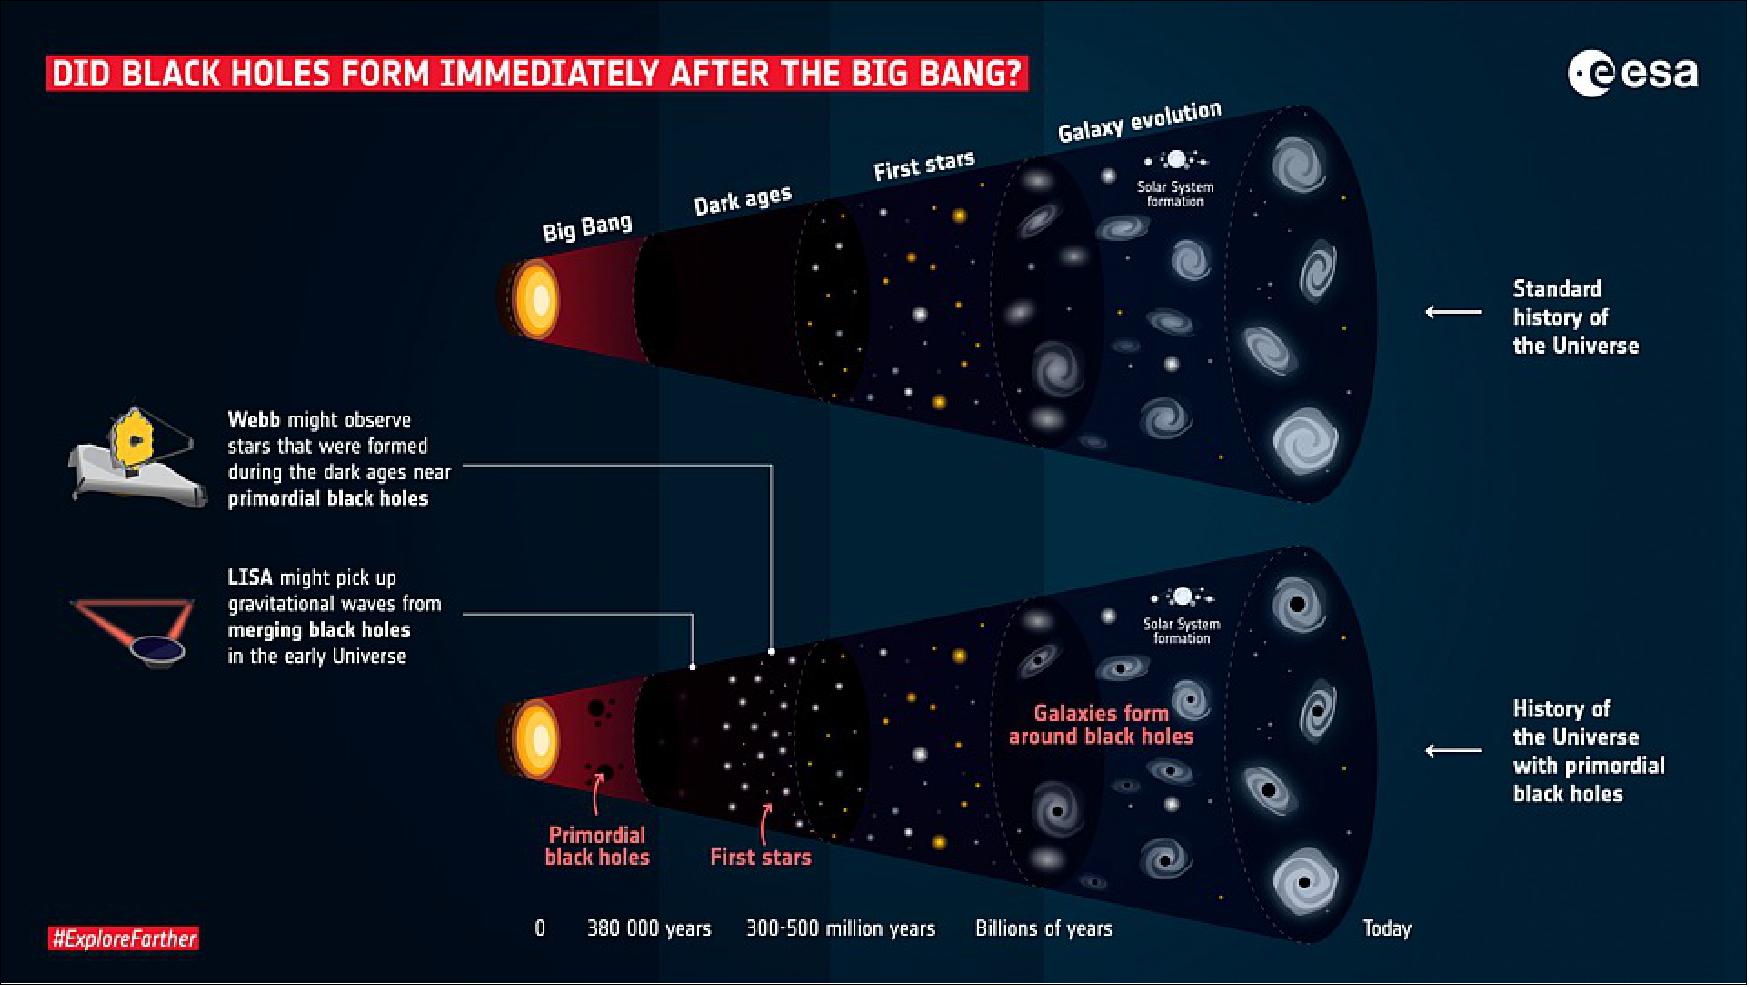 Figure 24: How did supermassive black holes form? What is dark matter? In an alternative model for how the Universe came to be, as compared to the ‘textbook' history of the Universe, a team of astronomers propose that both of these cosmic mysteries could be explained by so-called ‘primordial black holes'. - If most of the black holes formed immediately after the Big Bang, they could have started merging in the early Universe, forming more and more massive black holes over time. - According to this model, the Universe would be filled with black holes all over. Stars would start to form around these clumps of ‘dark matter', creating solar systems and galaxies over billions of years. If the first stars indeed formed around primordial black holes, they would exist earlier in the Universe than is expected by the ‘standard' model. Primordial black holes could then be the seeds from which all black holes form, including the one at the centre of our own Milky Way galaxy. - ESA's future missions Webb, Euclid and LISA mission may be able to shed light on the mystery. - In the graphic, the focus is on comparing the timing of the appearance of the first black holes and stars, and is not meant to imply there are no black holes considered in the standard model (image credit: ESA) 18)